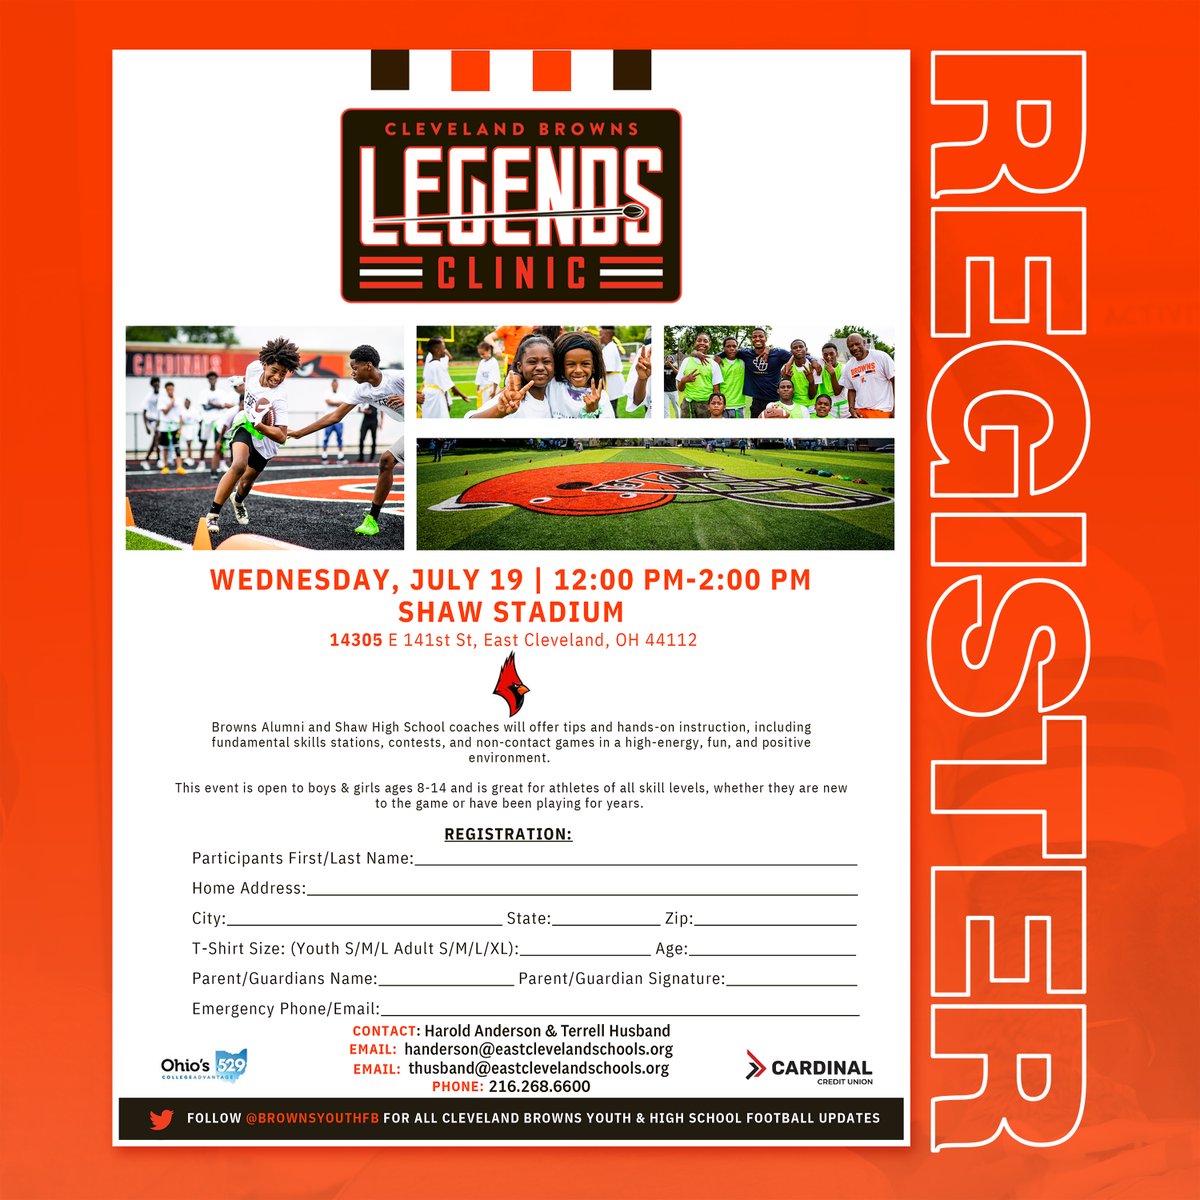 Calling all East Cleveland Students ages 8-14! Announcing the Cleveland Browns Legends Clinic at Shaw Stadium on Wednesday, July 19th! This event is open to boys and girls and is great for athletes of all skill levels! Register Today! eastclevelandschools.org